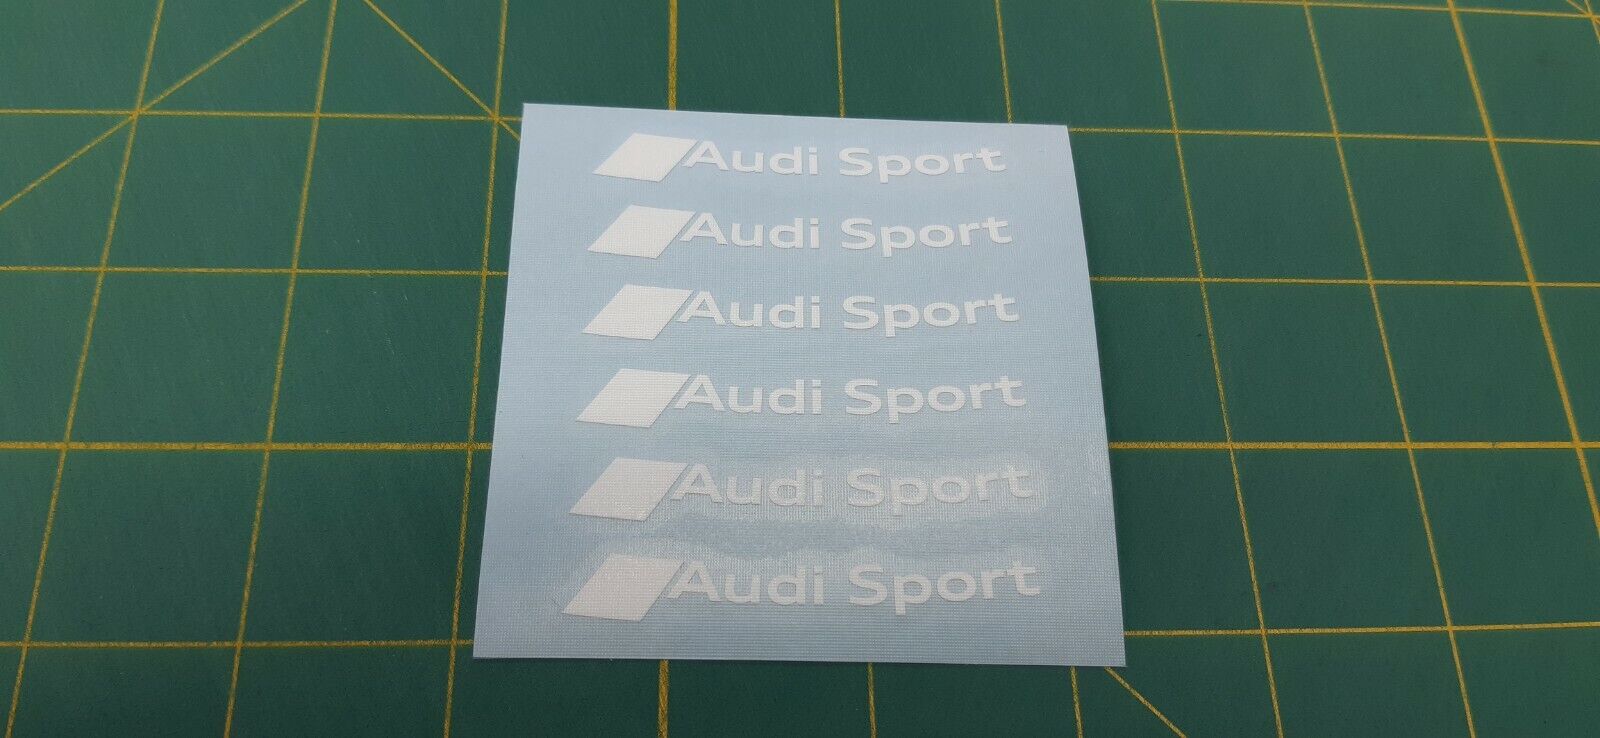 for Audi 6 x Audi Sport alloy wheel curved Decal Stickers  Audi Tuning Styling 